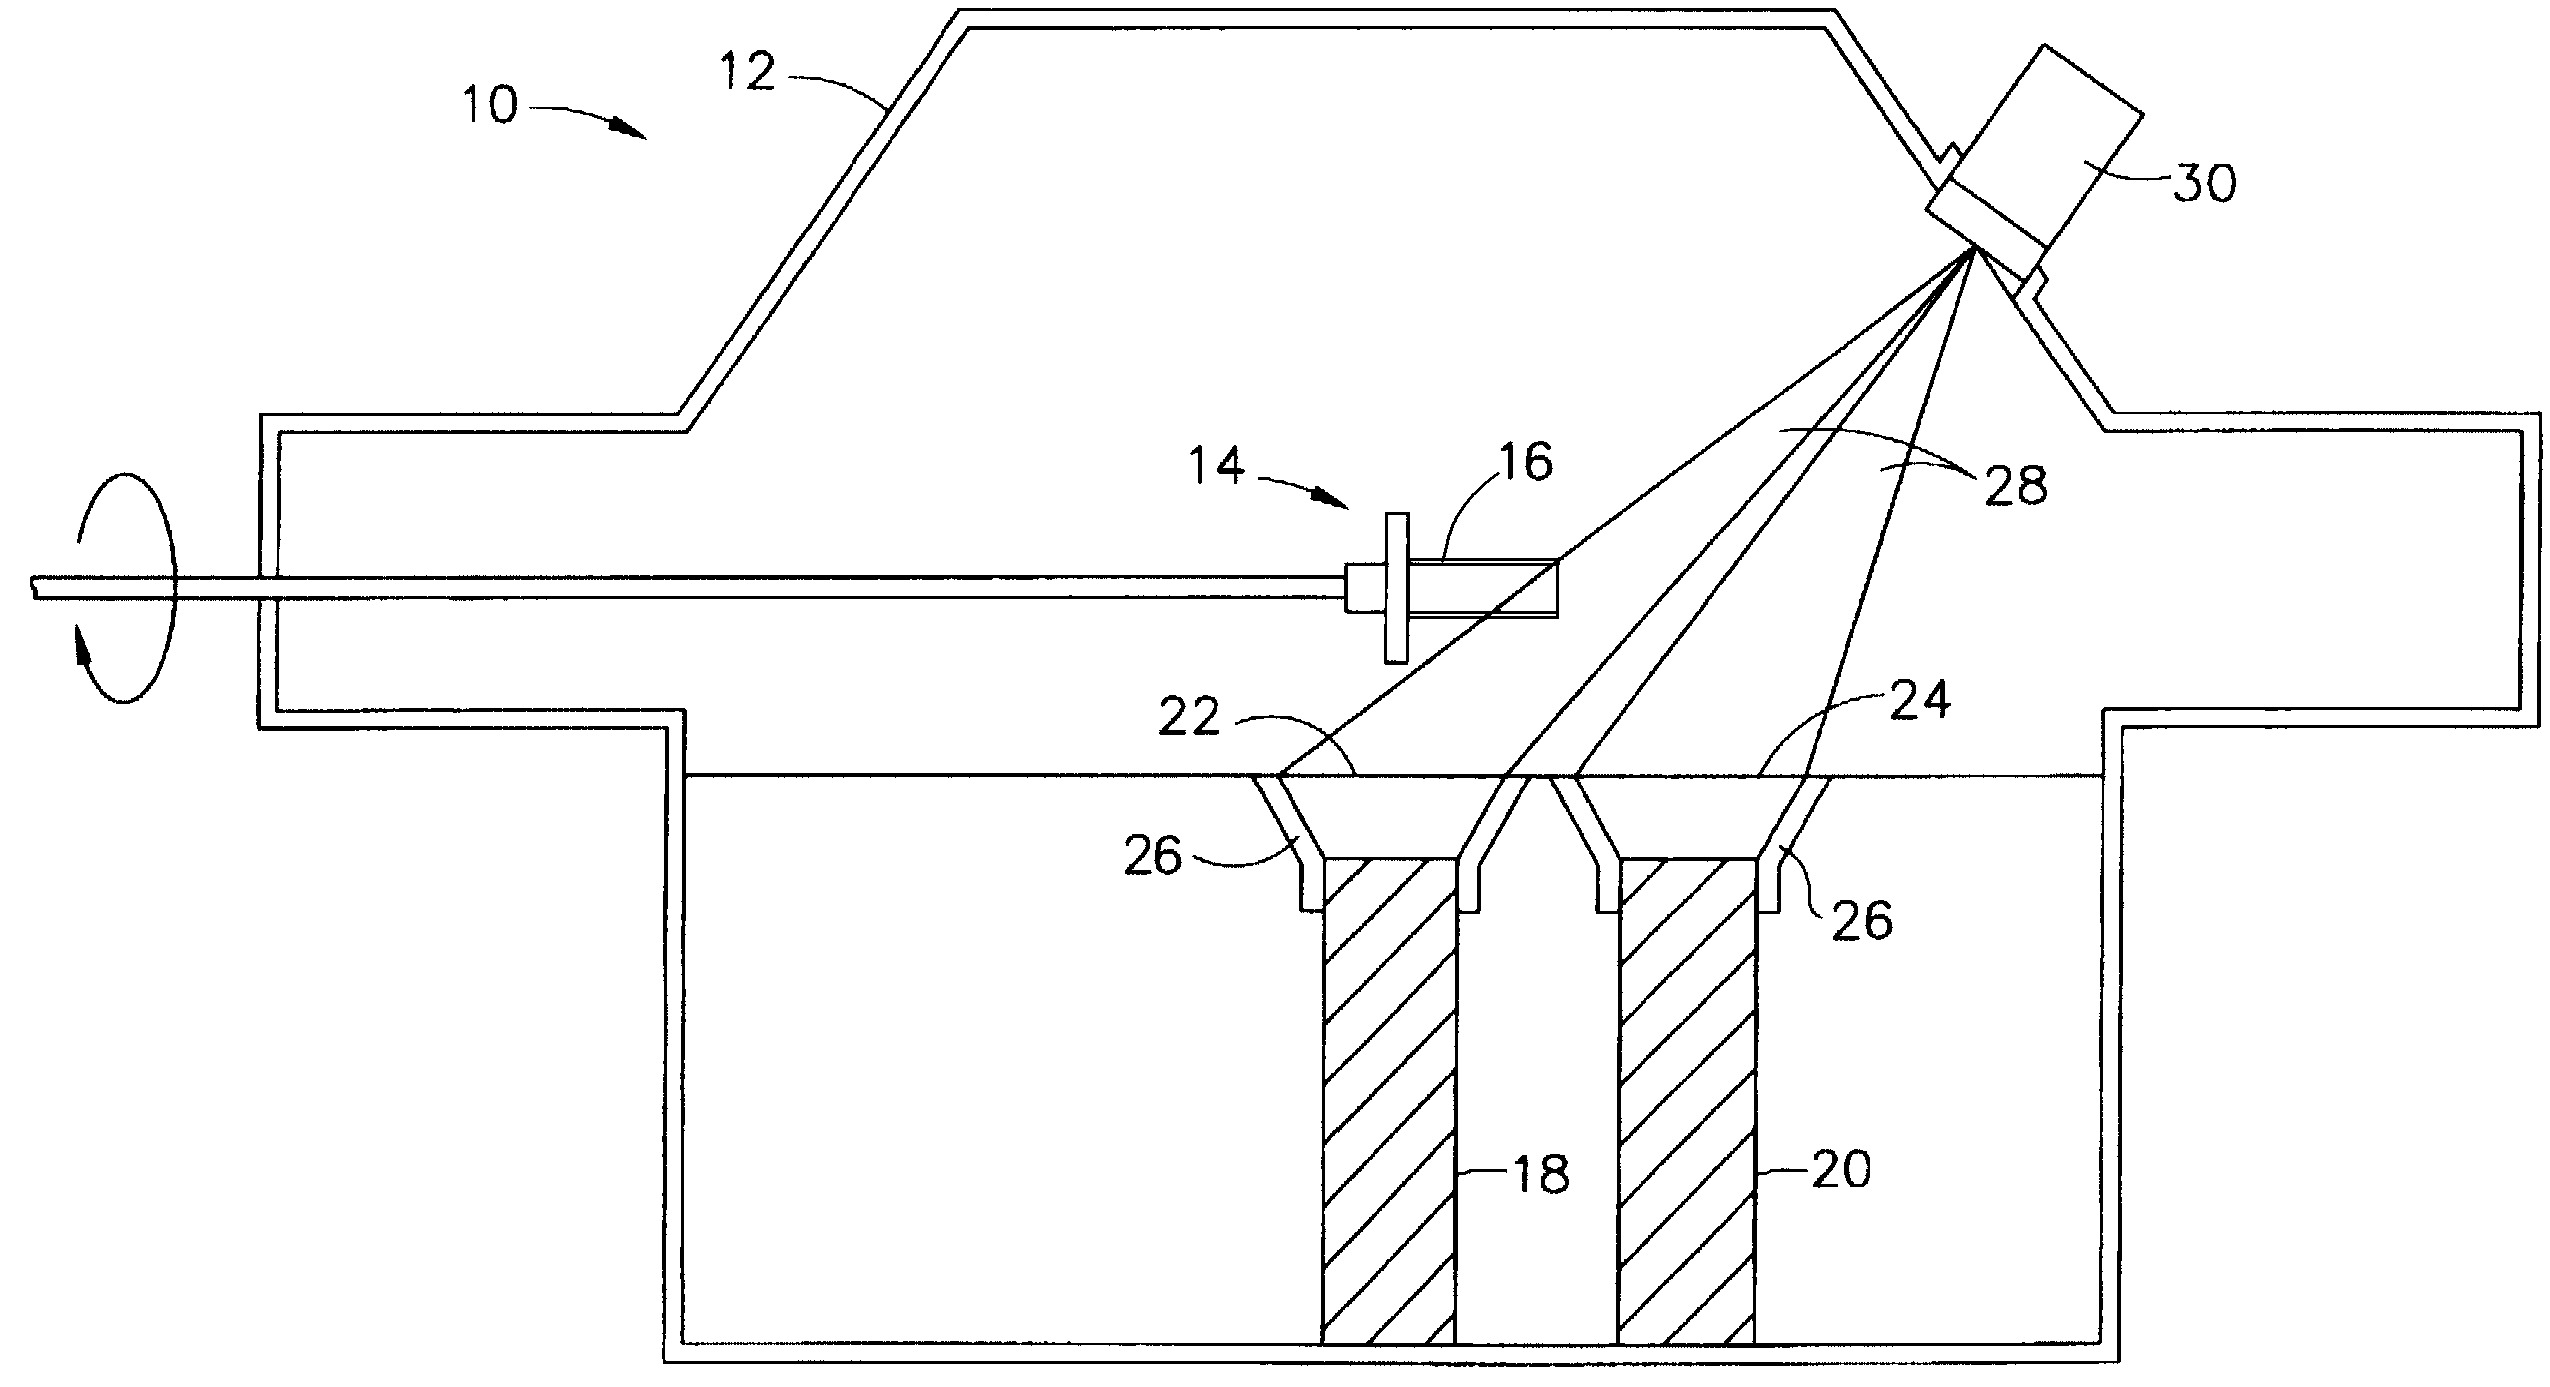 Process and apparatus for depositing a ceramic coating